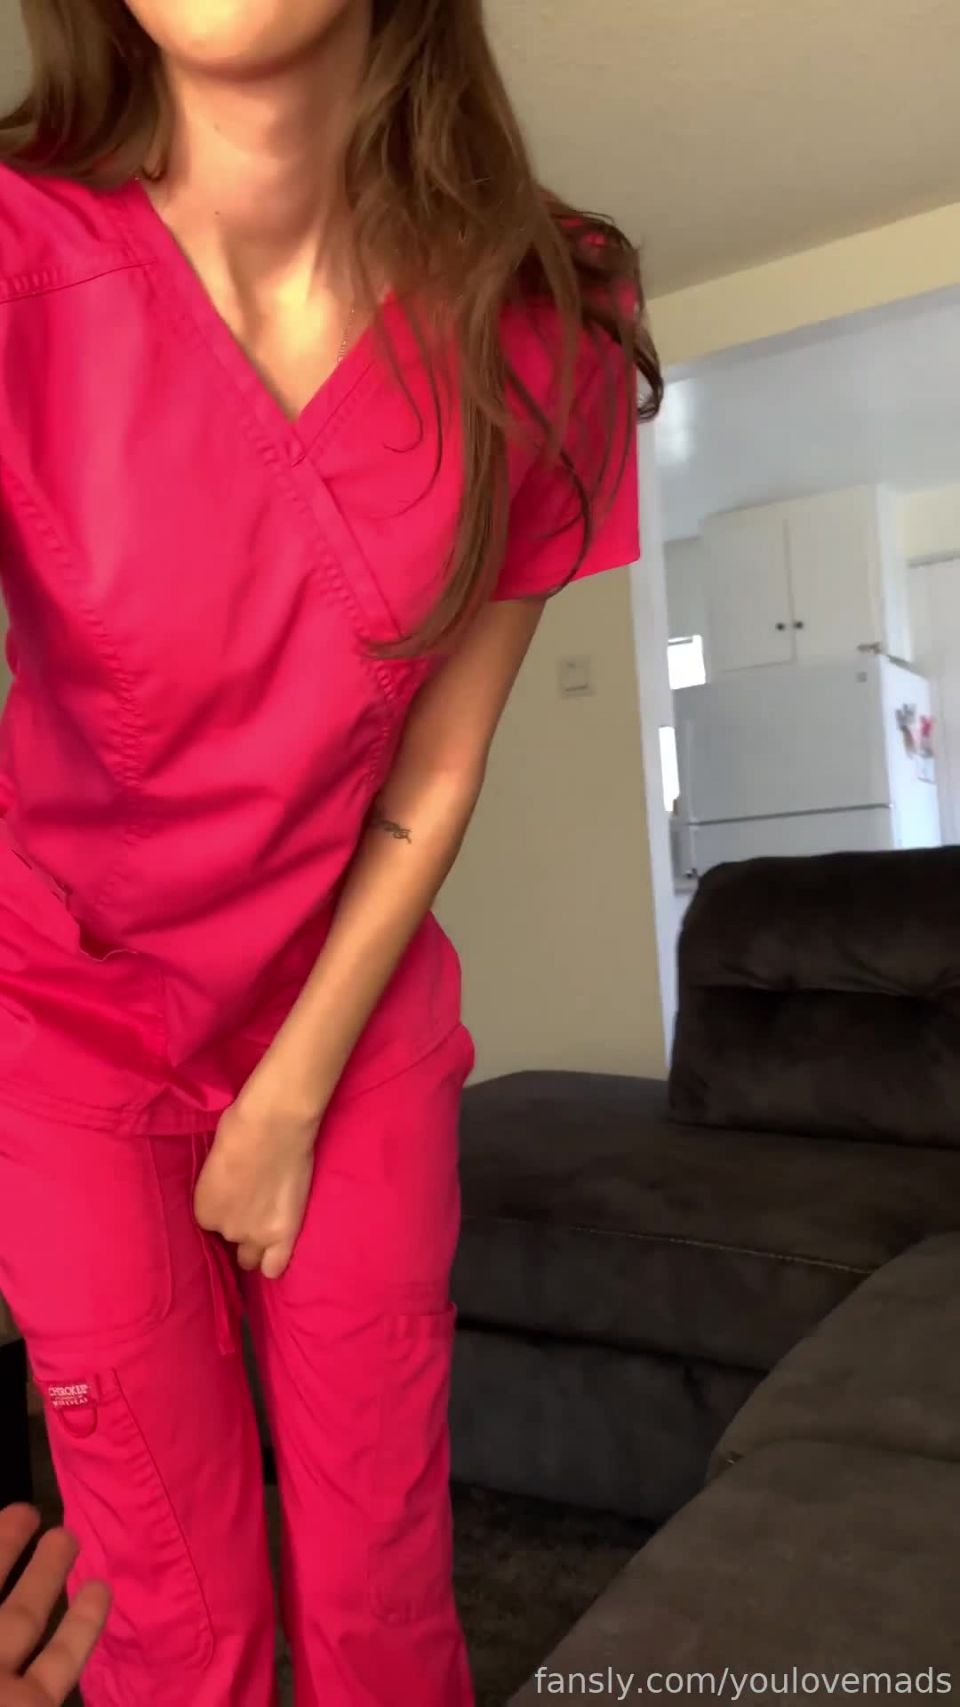 Youlovemads - 02-10-2021 4944 - PPV Nurse Facial #1 - Youlovemads